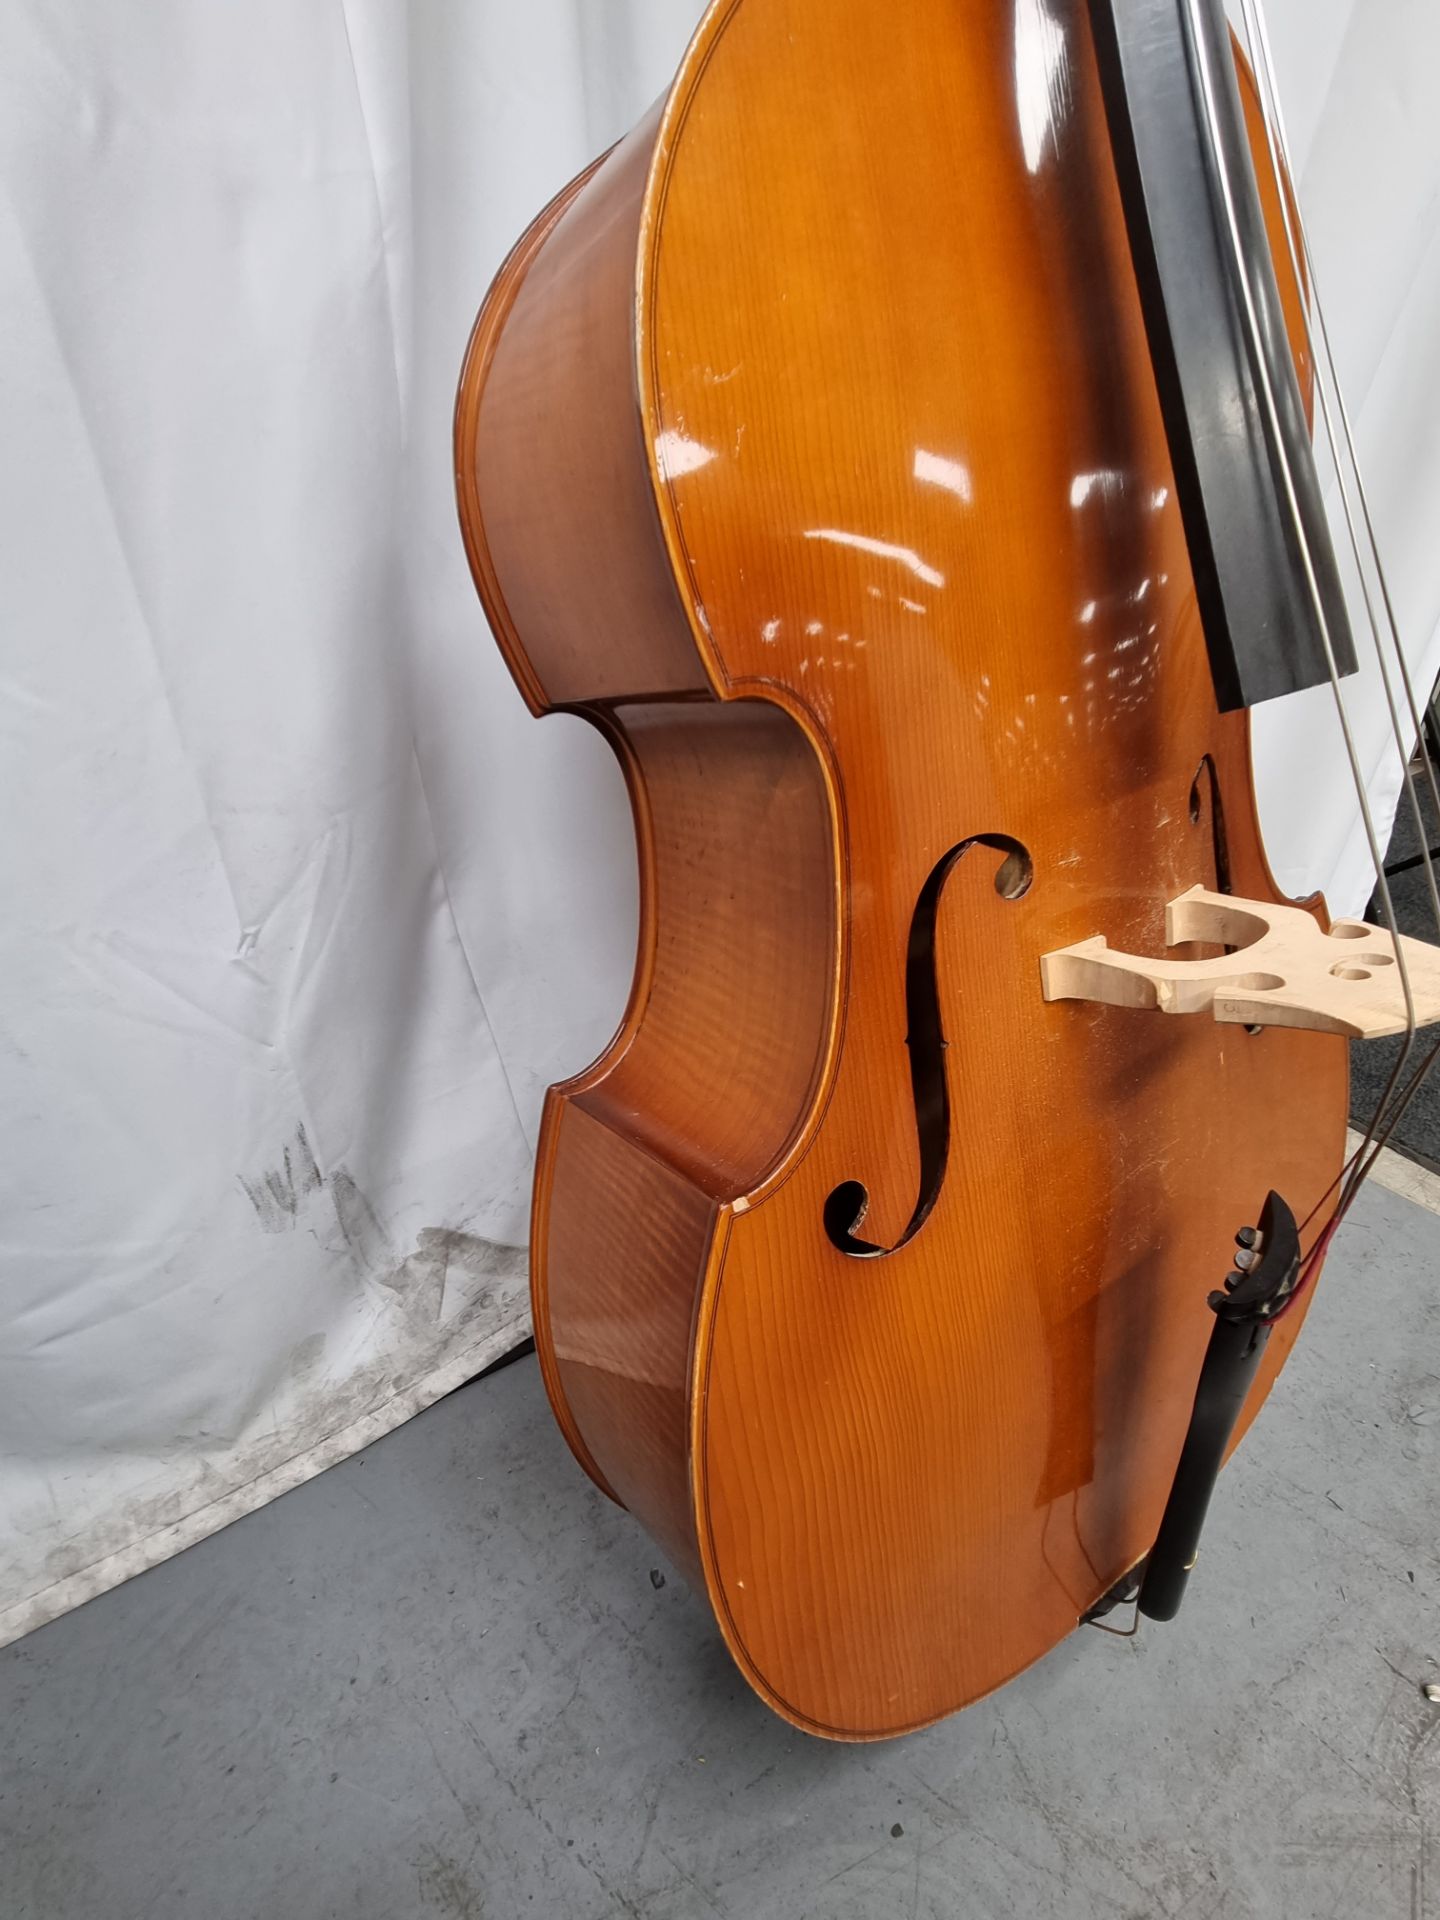 Roderich Paesold 590P Double bass & case - Image 10 of 30